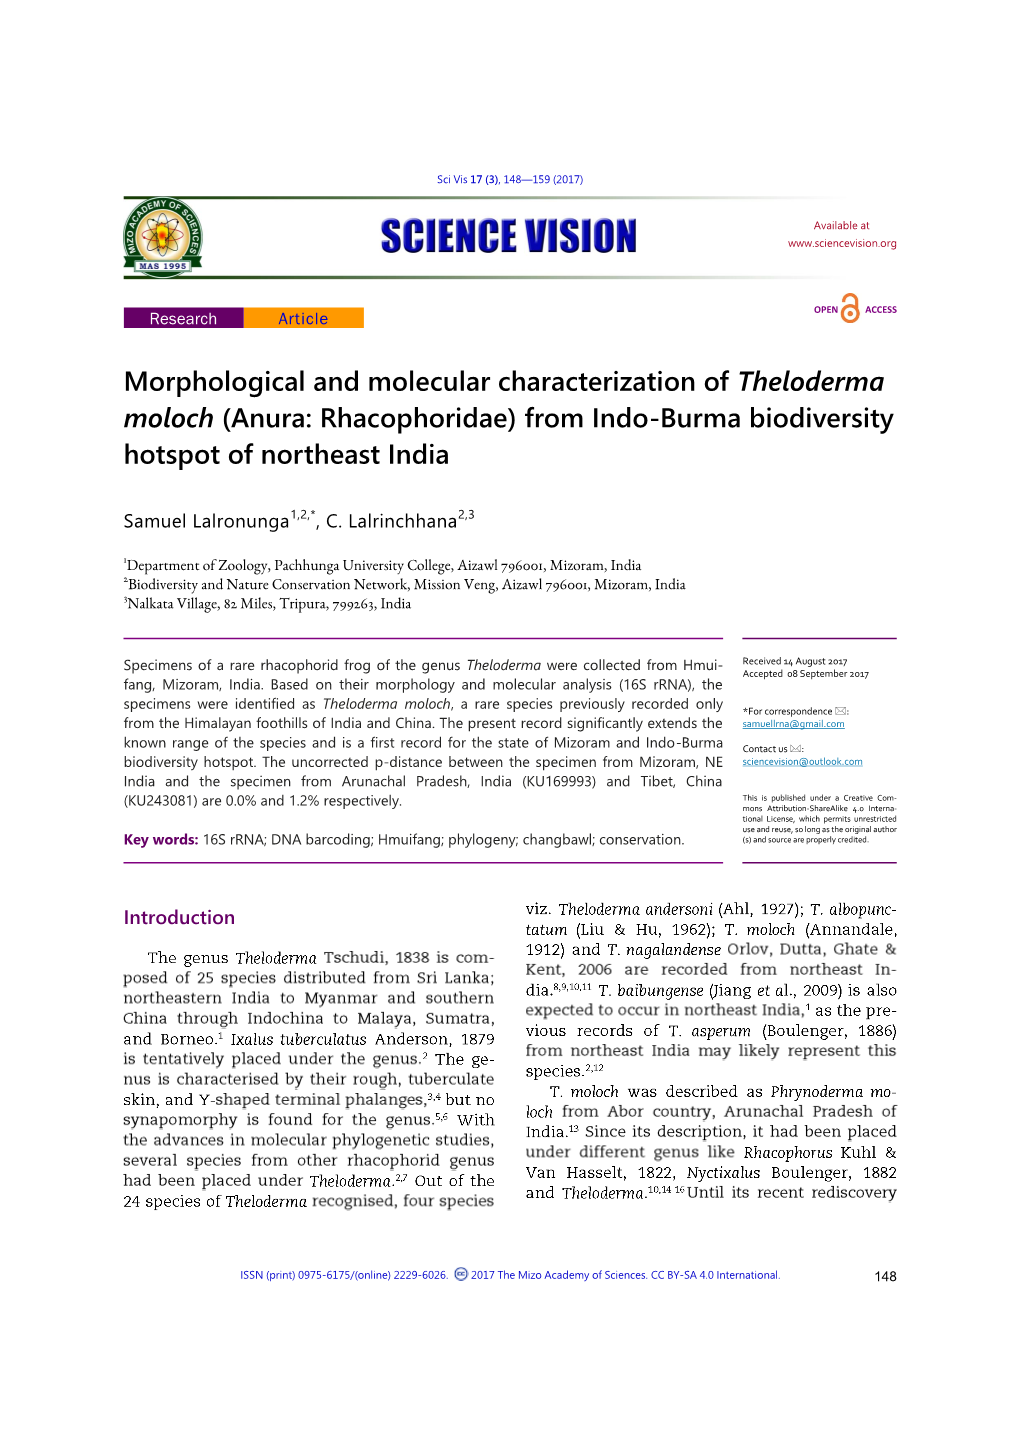 Morphological and Molecular Characterization of Theloderma Moloch (Anura: Rhacophoridae) from Indo-Burma Biodiversity Hotspot of Northeast India